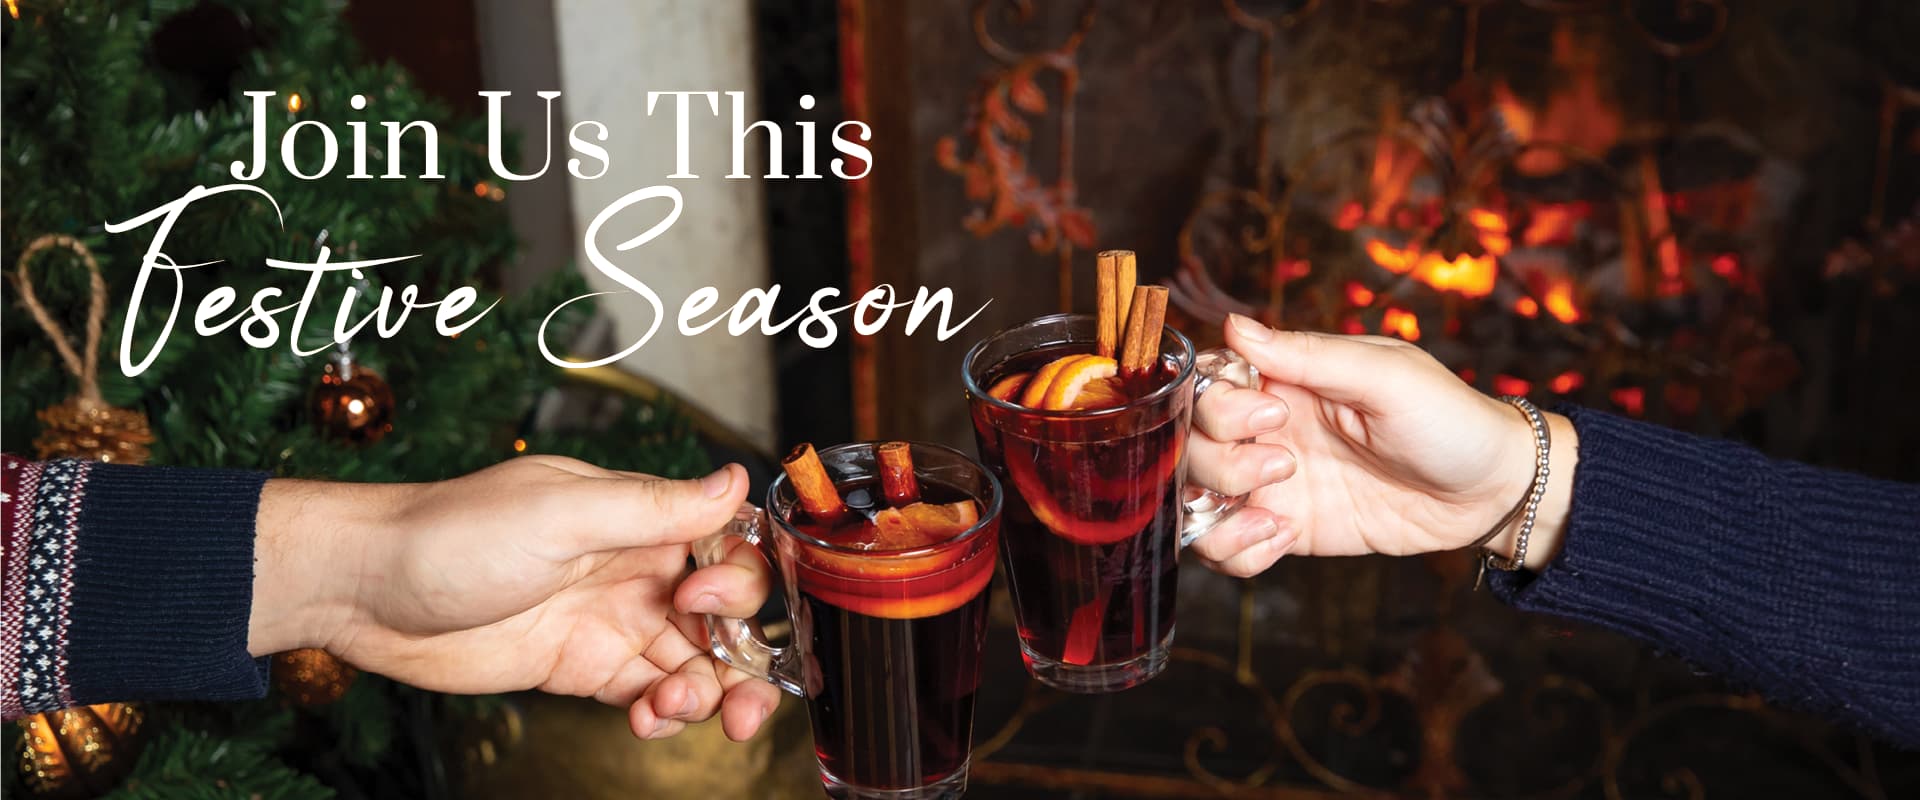 join us this festive season at Ferryboat Inn | Mulled Wine